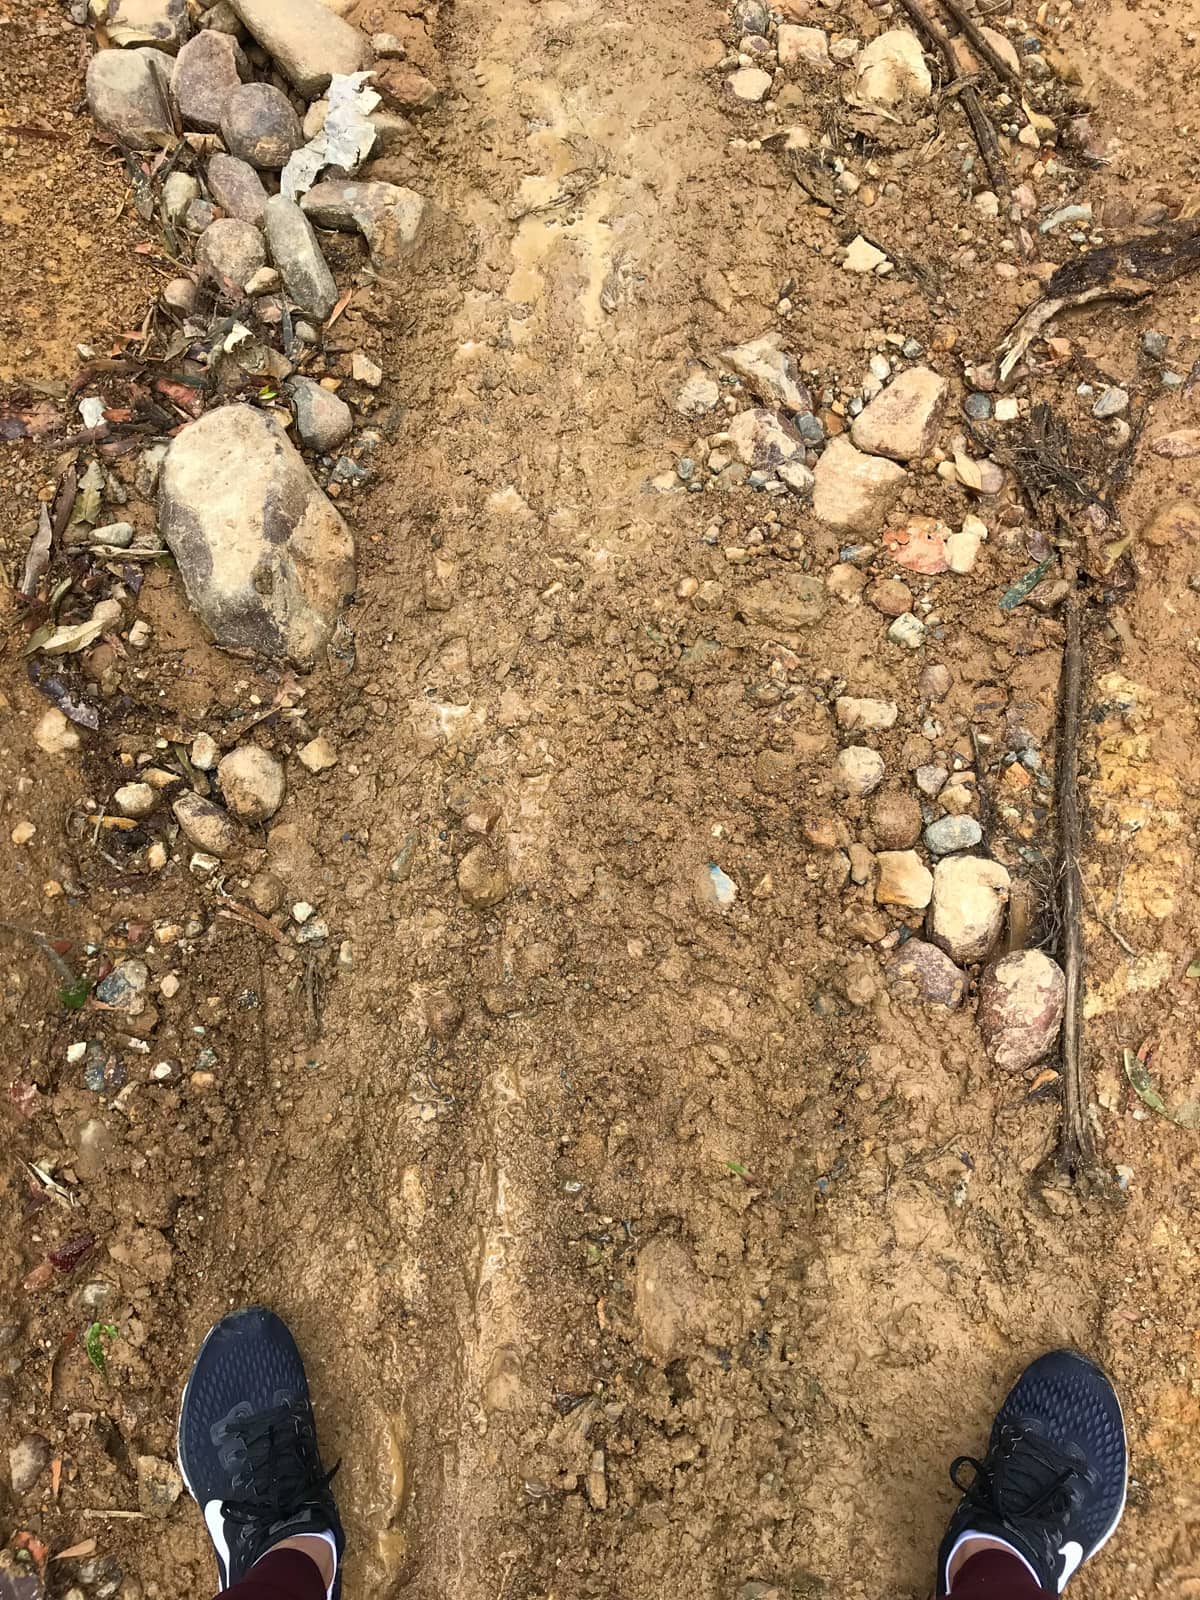 The same dirt track in the previous photo, seen from above, taken from the perspective of someone looking down. The person’s walking shoes can be seen at the bottom edge of the frame.